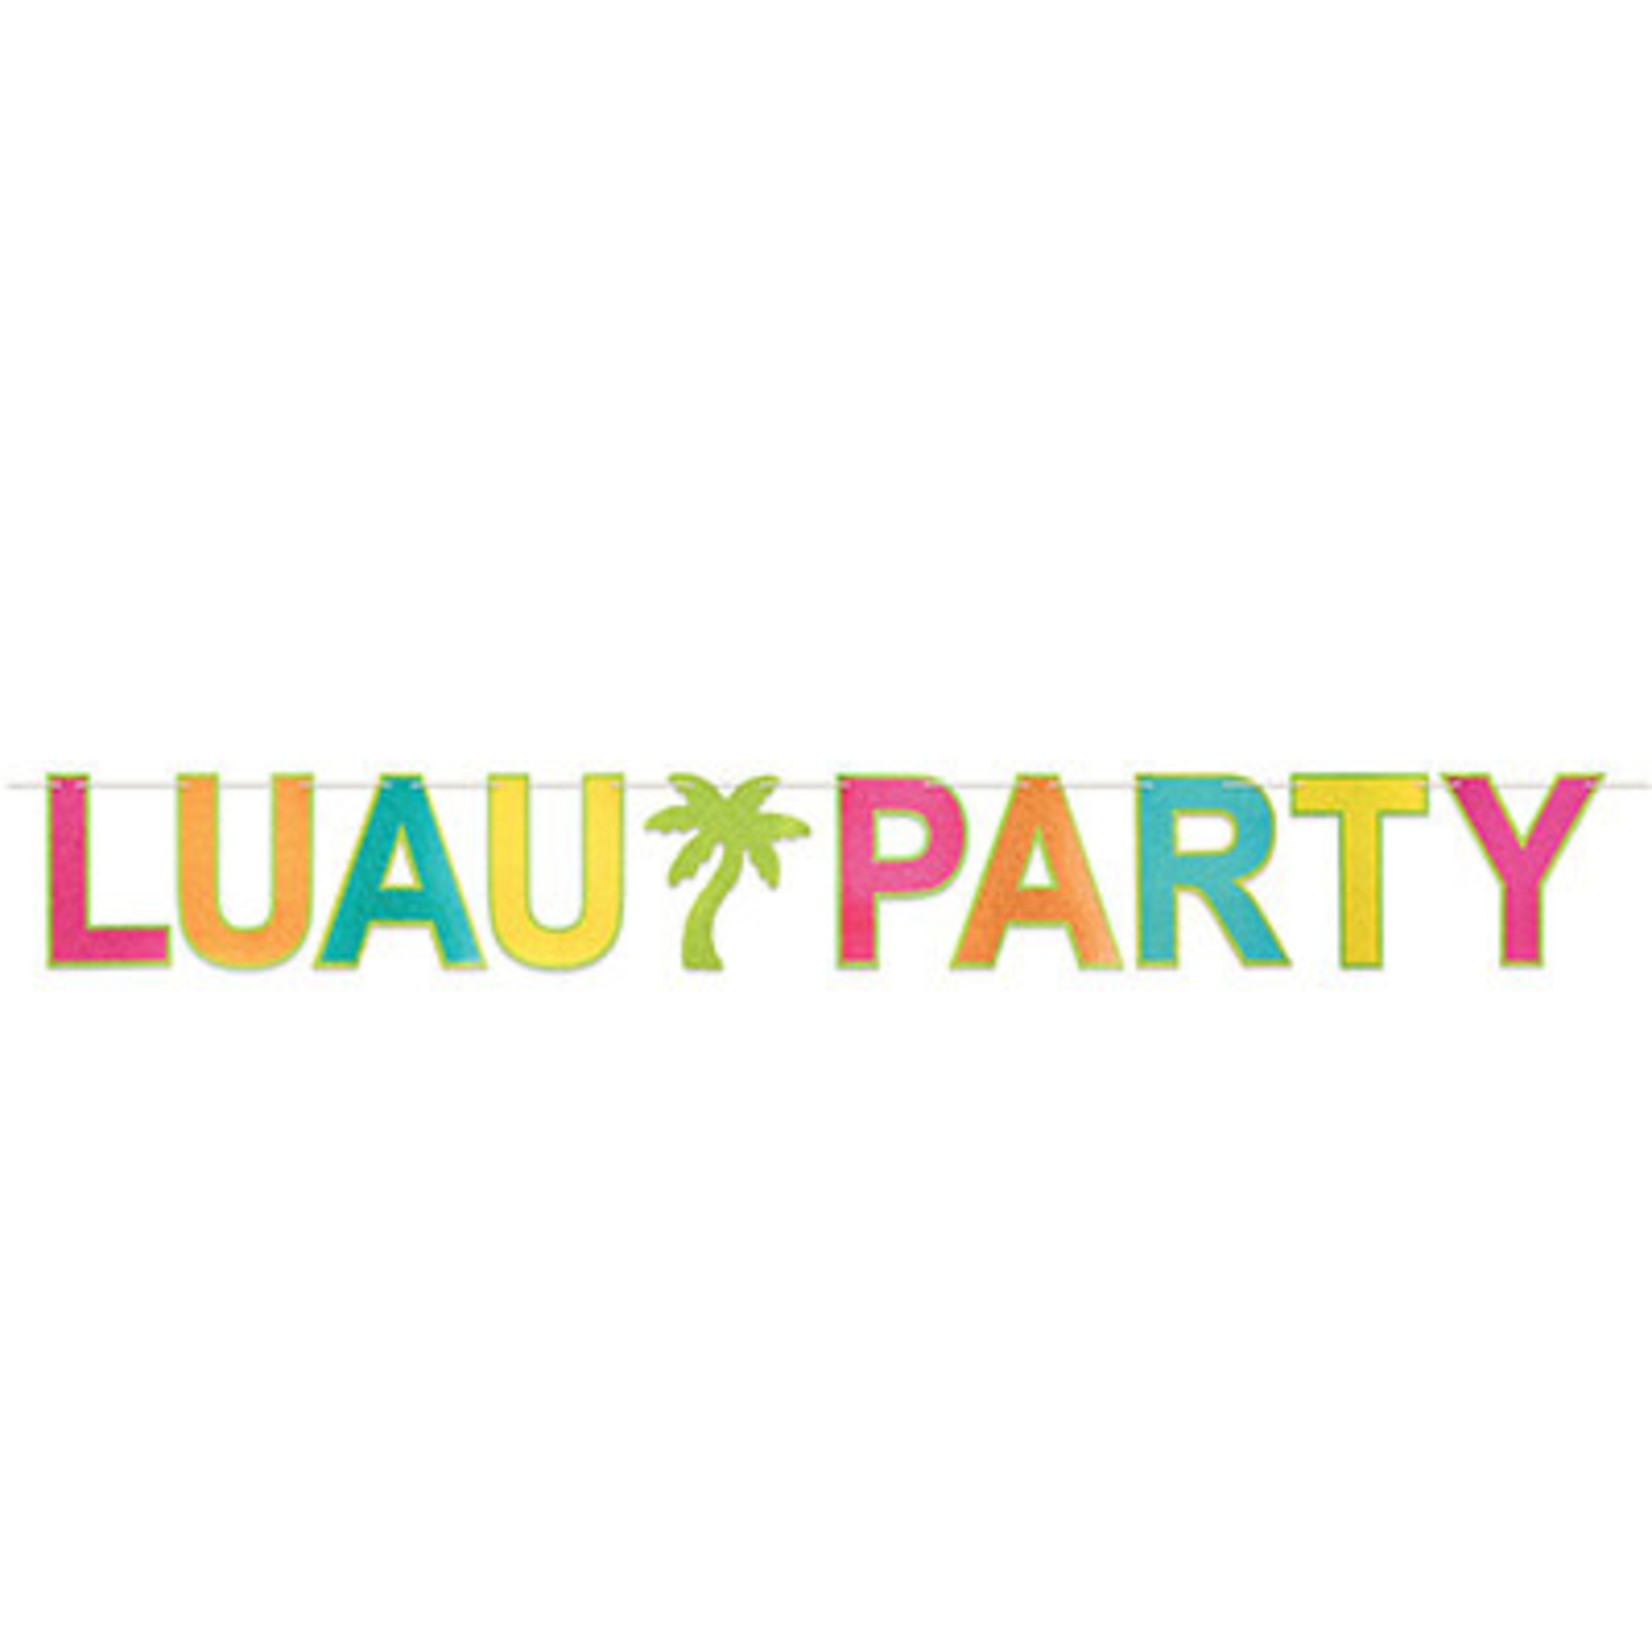 Beistle Luau Party Banner - 7ft.